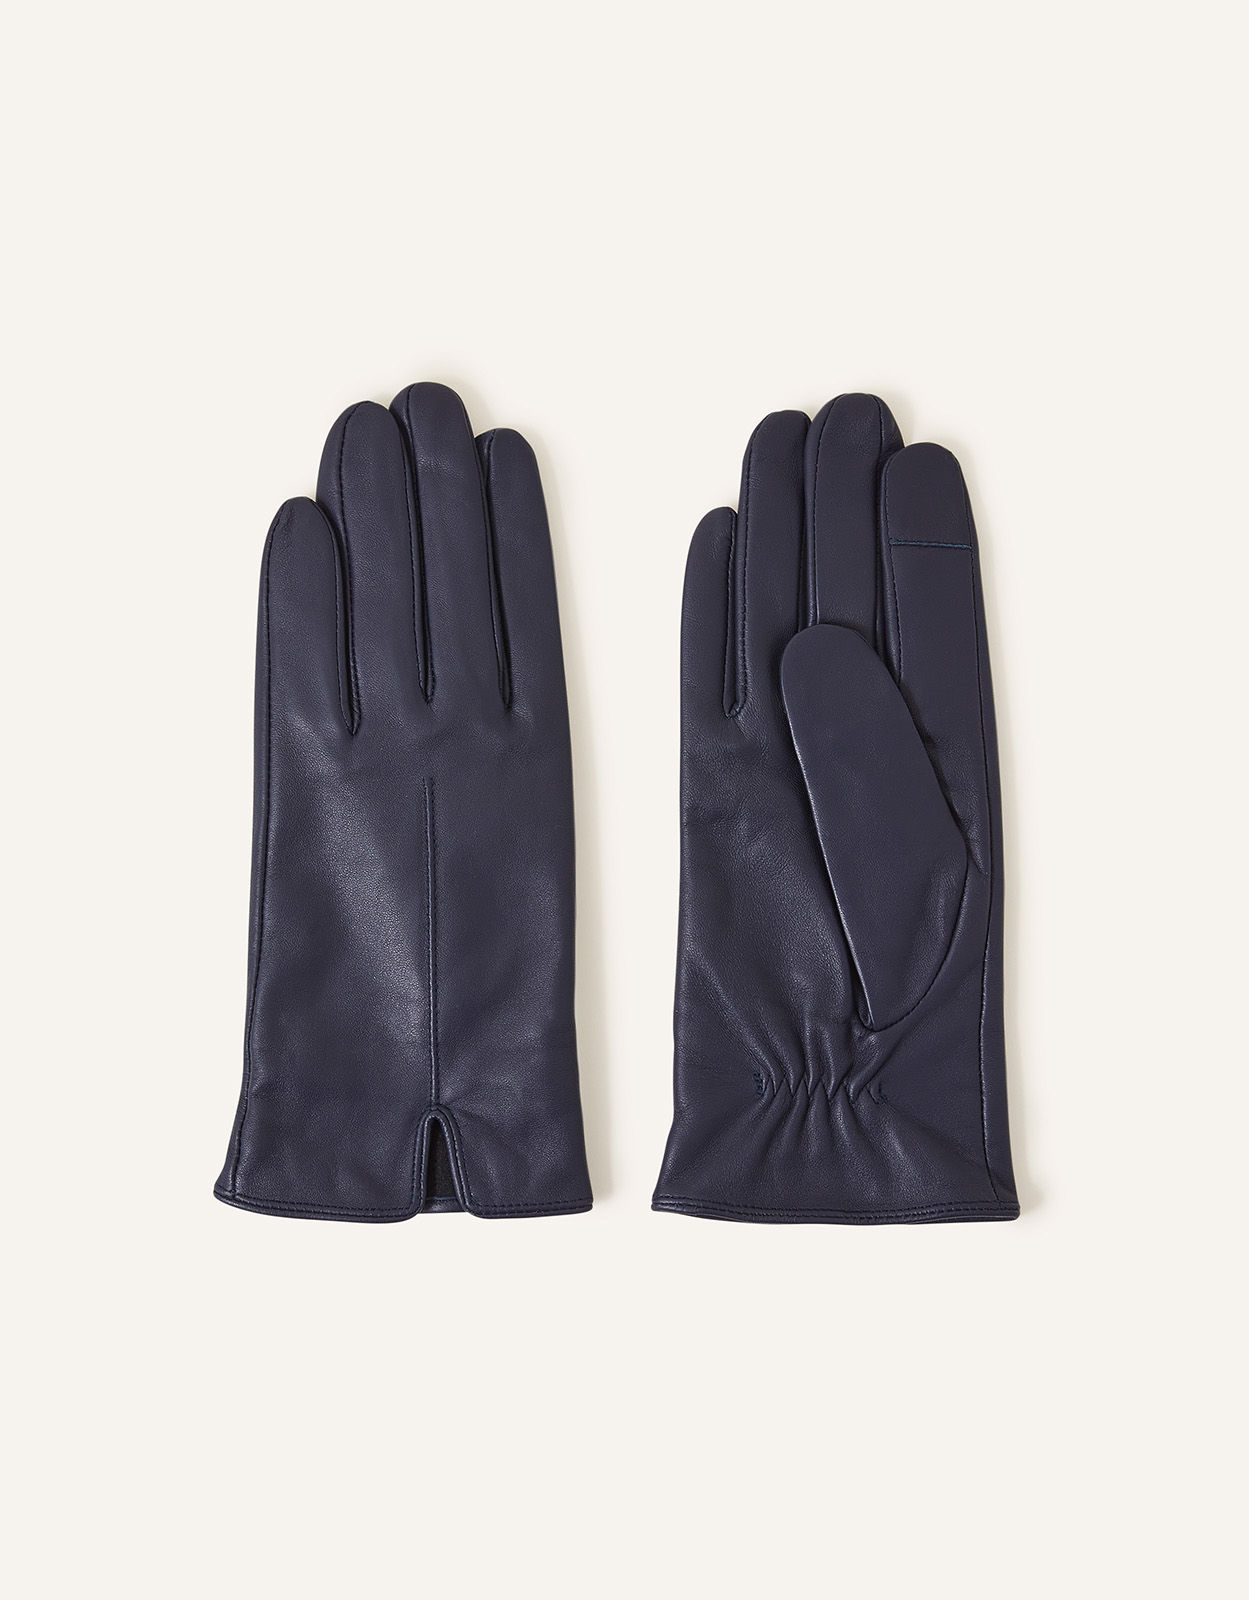 Accessorize Touchscreen Leather Gloves Blue, Size: One Size